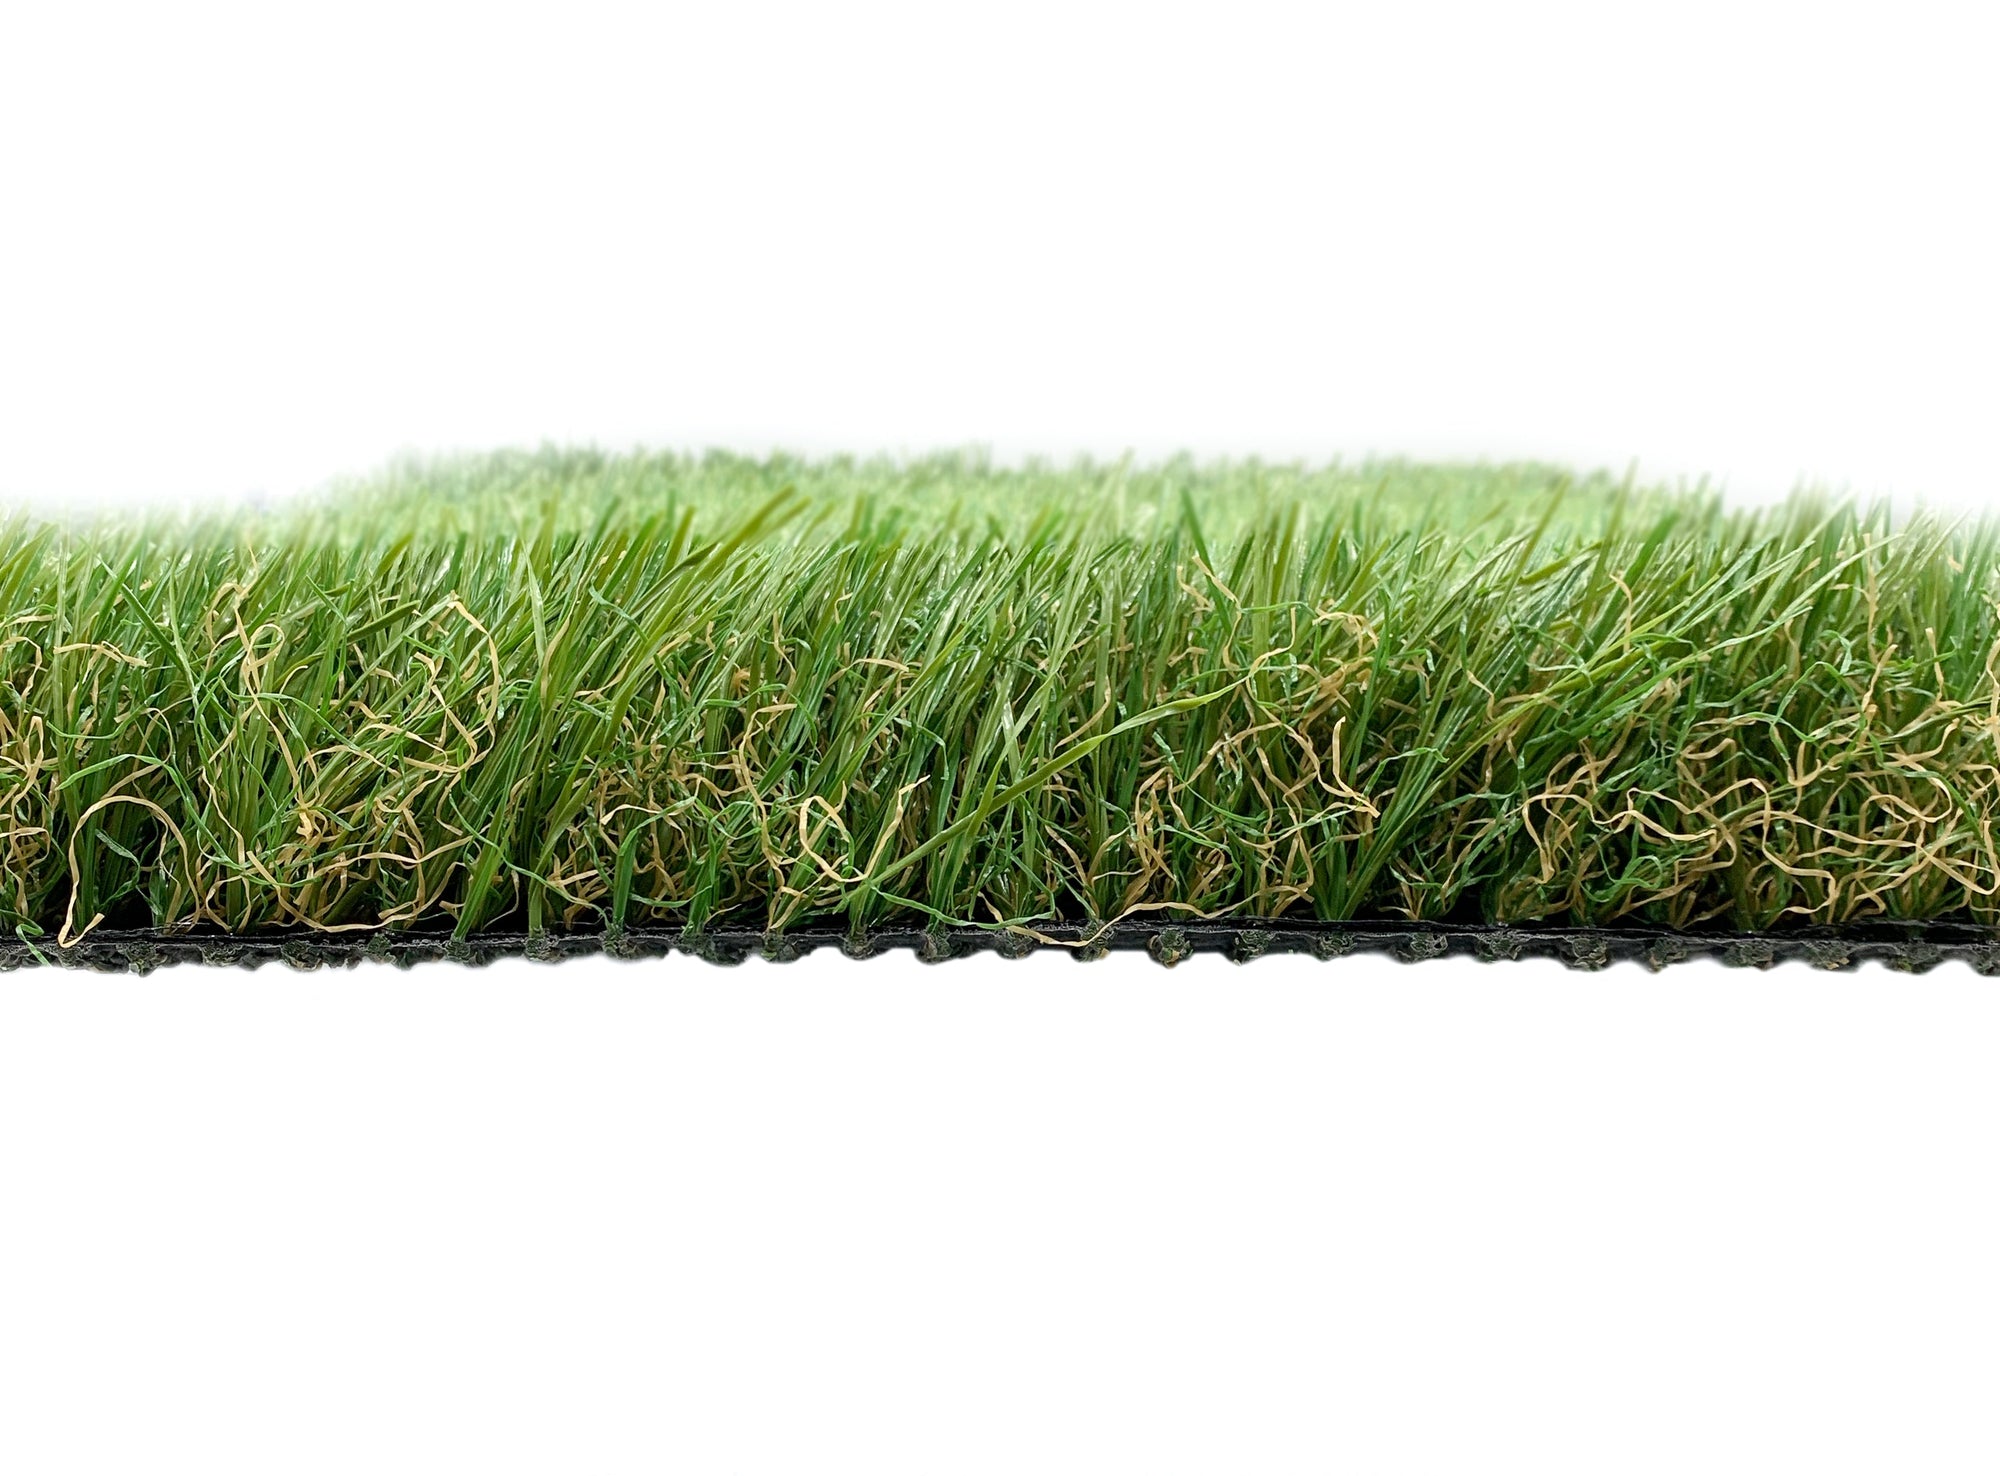 Village Town Square-Synthetic Grass Turf-Shawgrass-Shaw-310-Urethane-2.25-KNB Mills